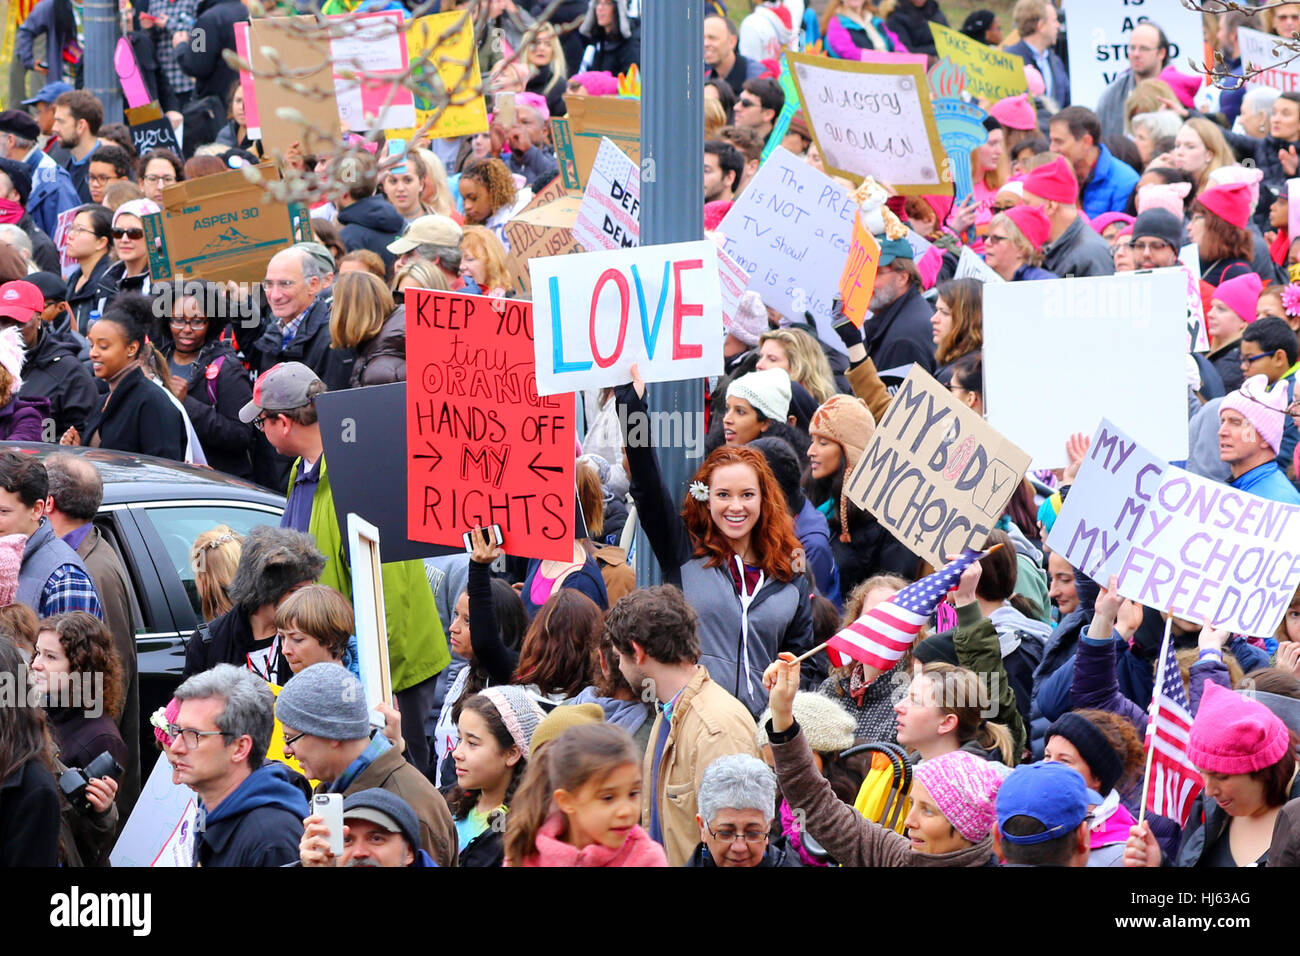 Washington, DC, USA. 21st January, 2017. A woman holds a sign, 'LOVE' amidst a sea of people in the March on Washington. January 21, 2017. Stock Photo